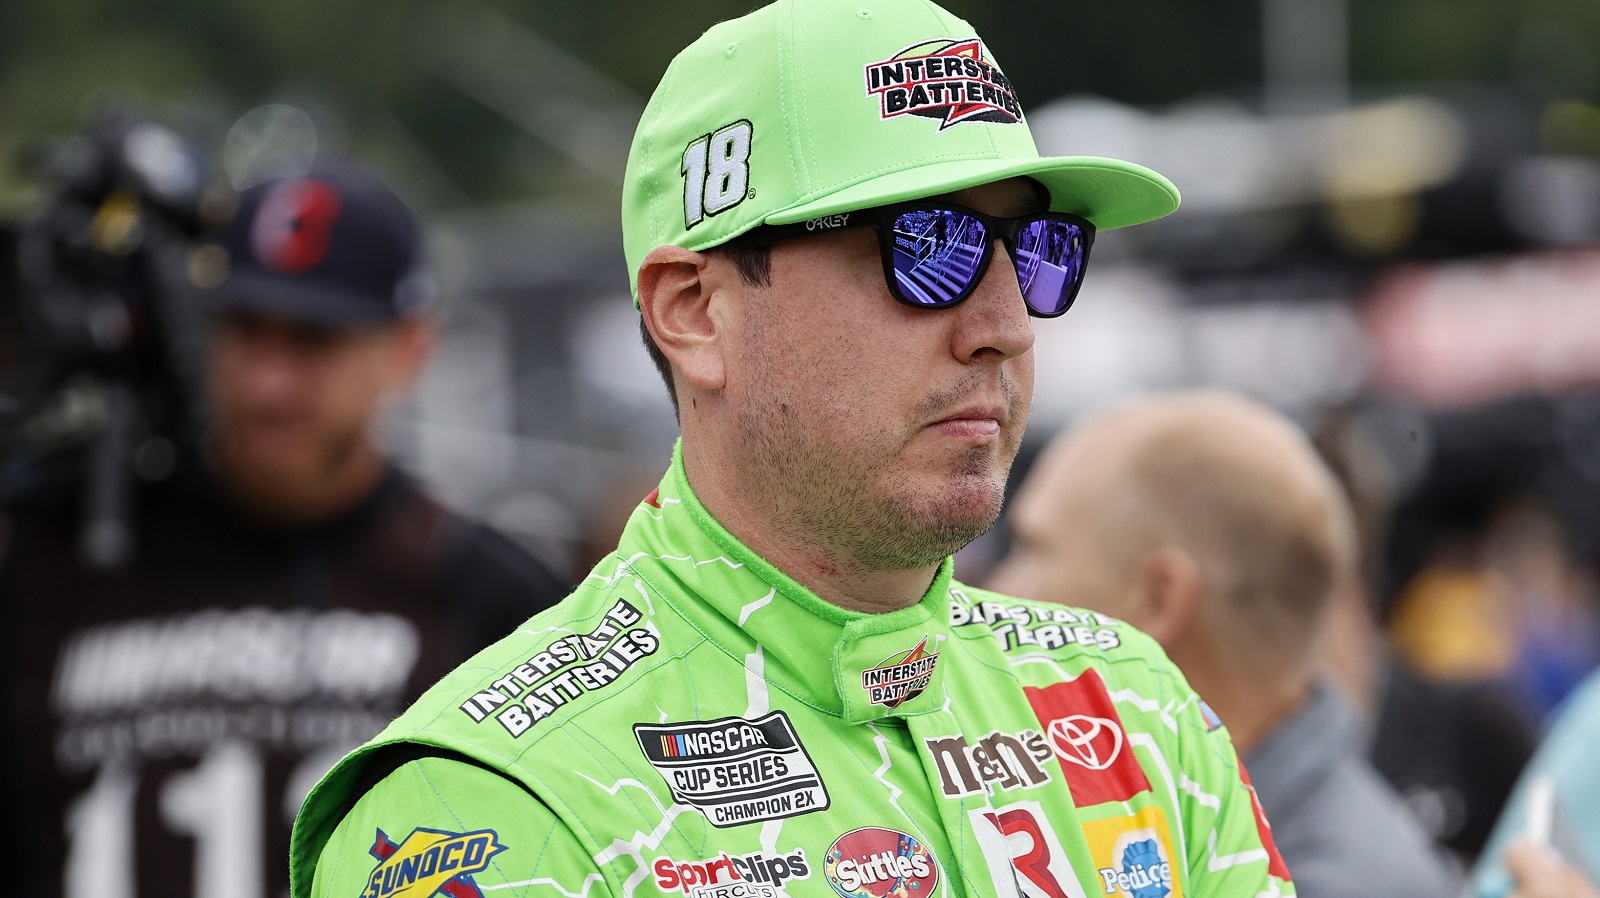 Kyle Busch, driver of the No. 18 Interstate Batteries Toyota Camry, before the Foxwoods Resort Casino 301 on July 18, 2021. | Fred Kfoury III/Icon Sportswire via Getty Images